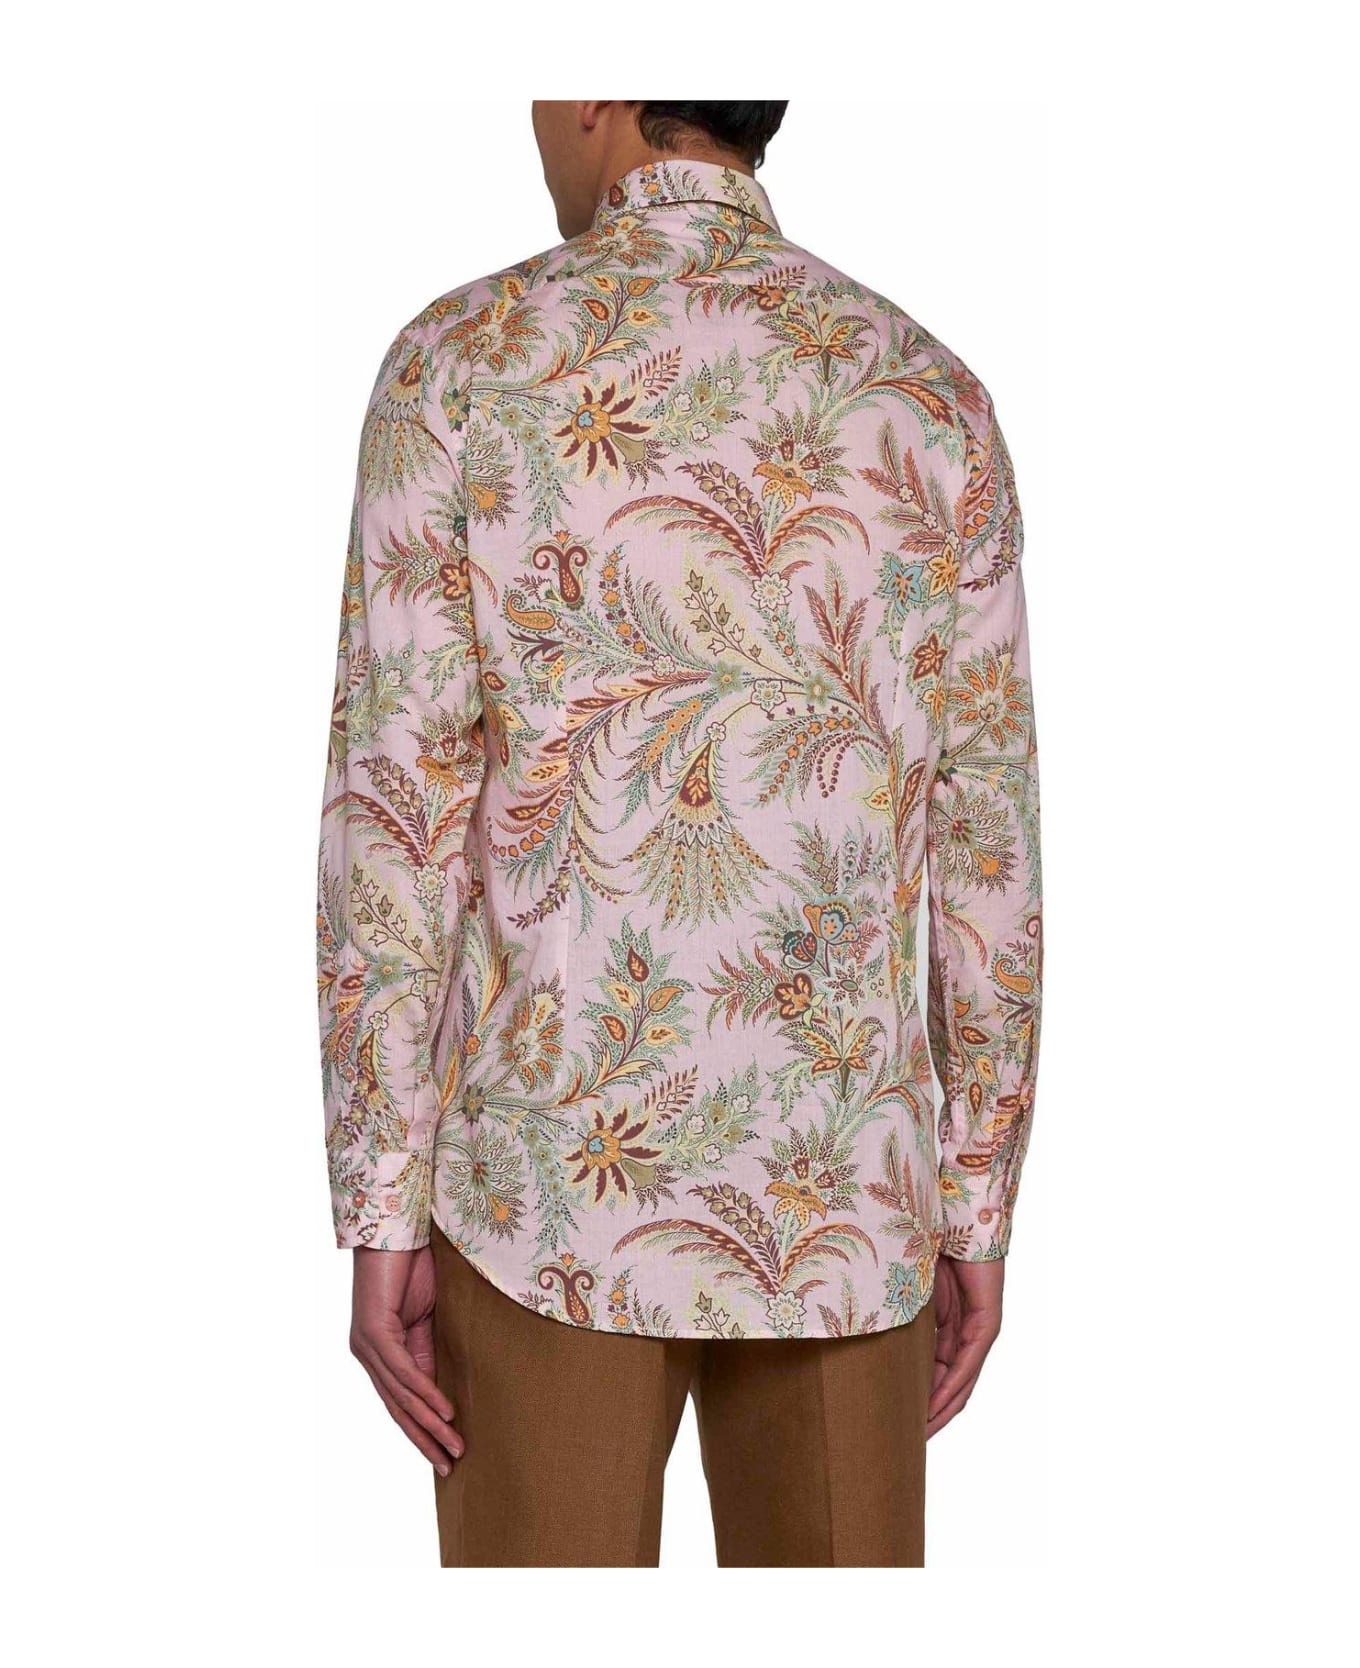 Etro Floral Printed Long-sleeved Shirt - Stampa f.do rosa シャツ